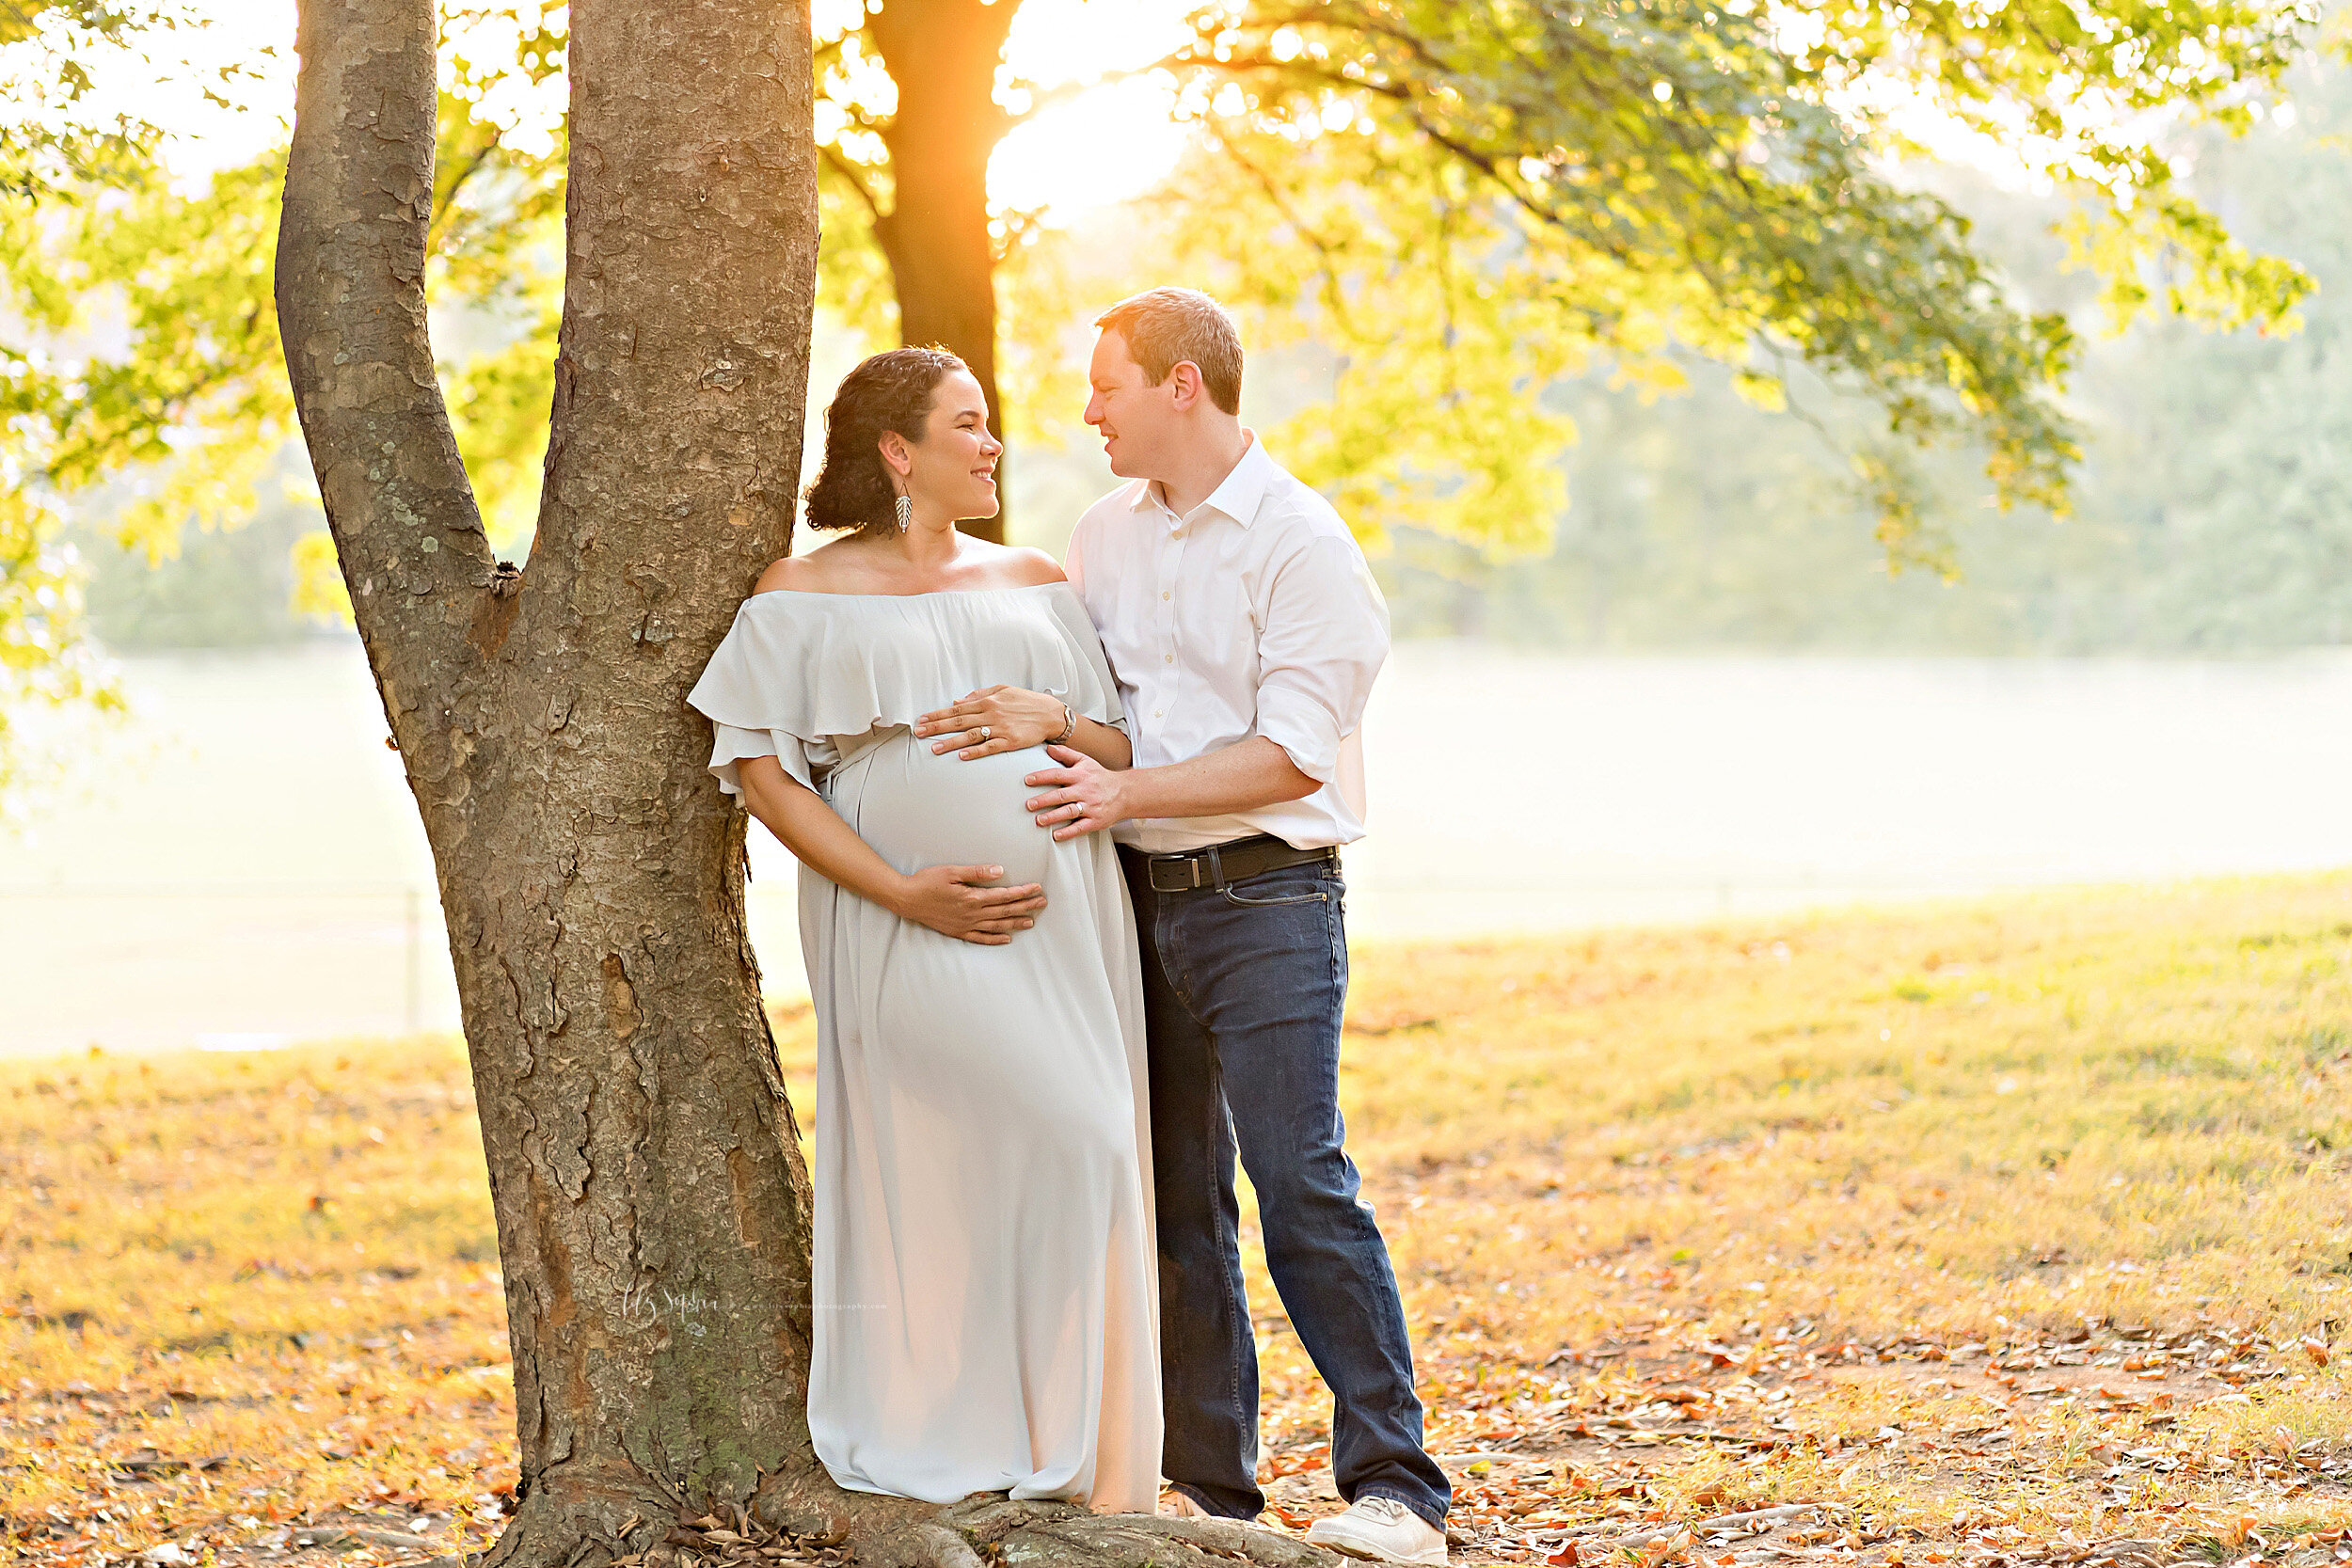 atlanta-decatur-old-fourth-ward-poncey-highlands-candler-park-grant-park-brookhaven-buckhead-virginia-highlands-west-end-decatur-lily-sophia-photography-family-maternity-park-session_2417.jpg